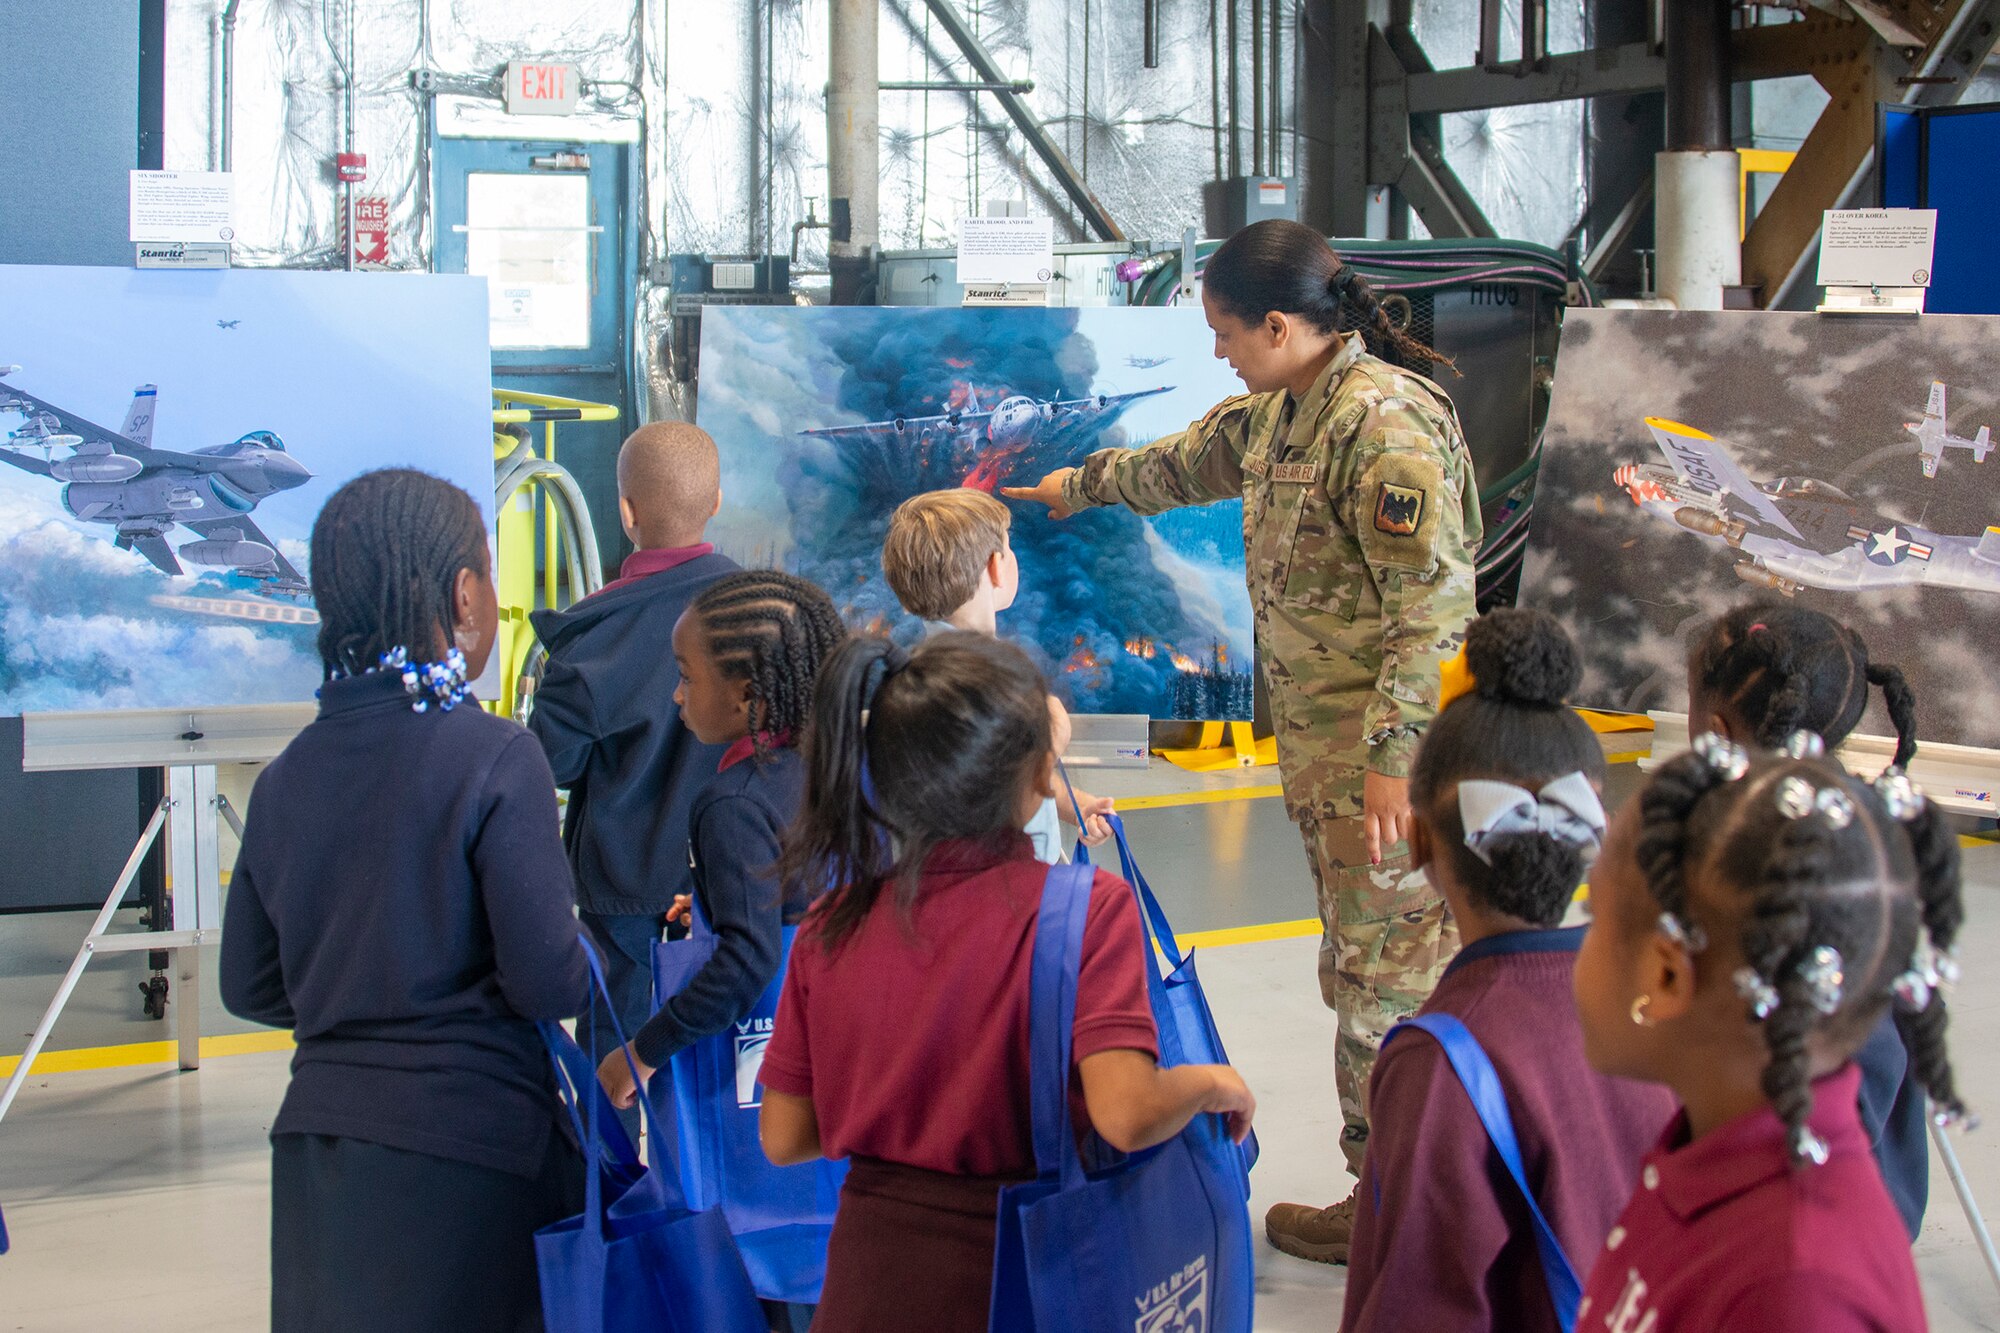 A chaperone talks about the Department of the Air Force Art Program artwork on display to students at a science, technology, engineering, arts and mathematics exhibit at the Joint Base Andrews 2022 Air and Space Expo Sept. 16, 2022.